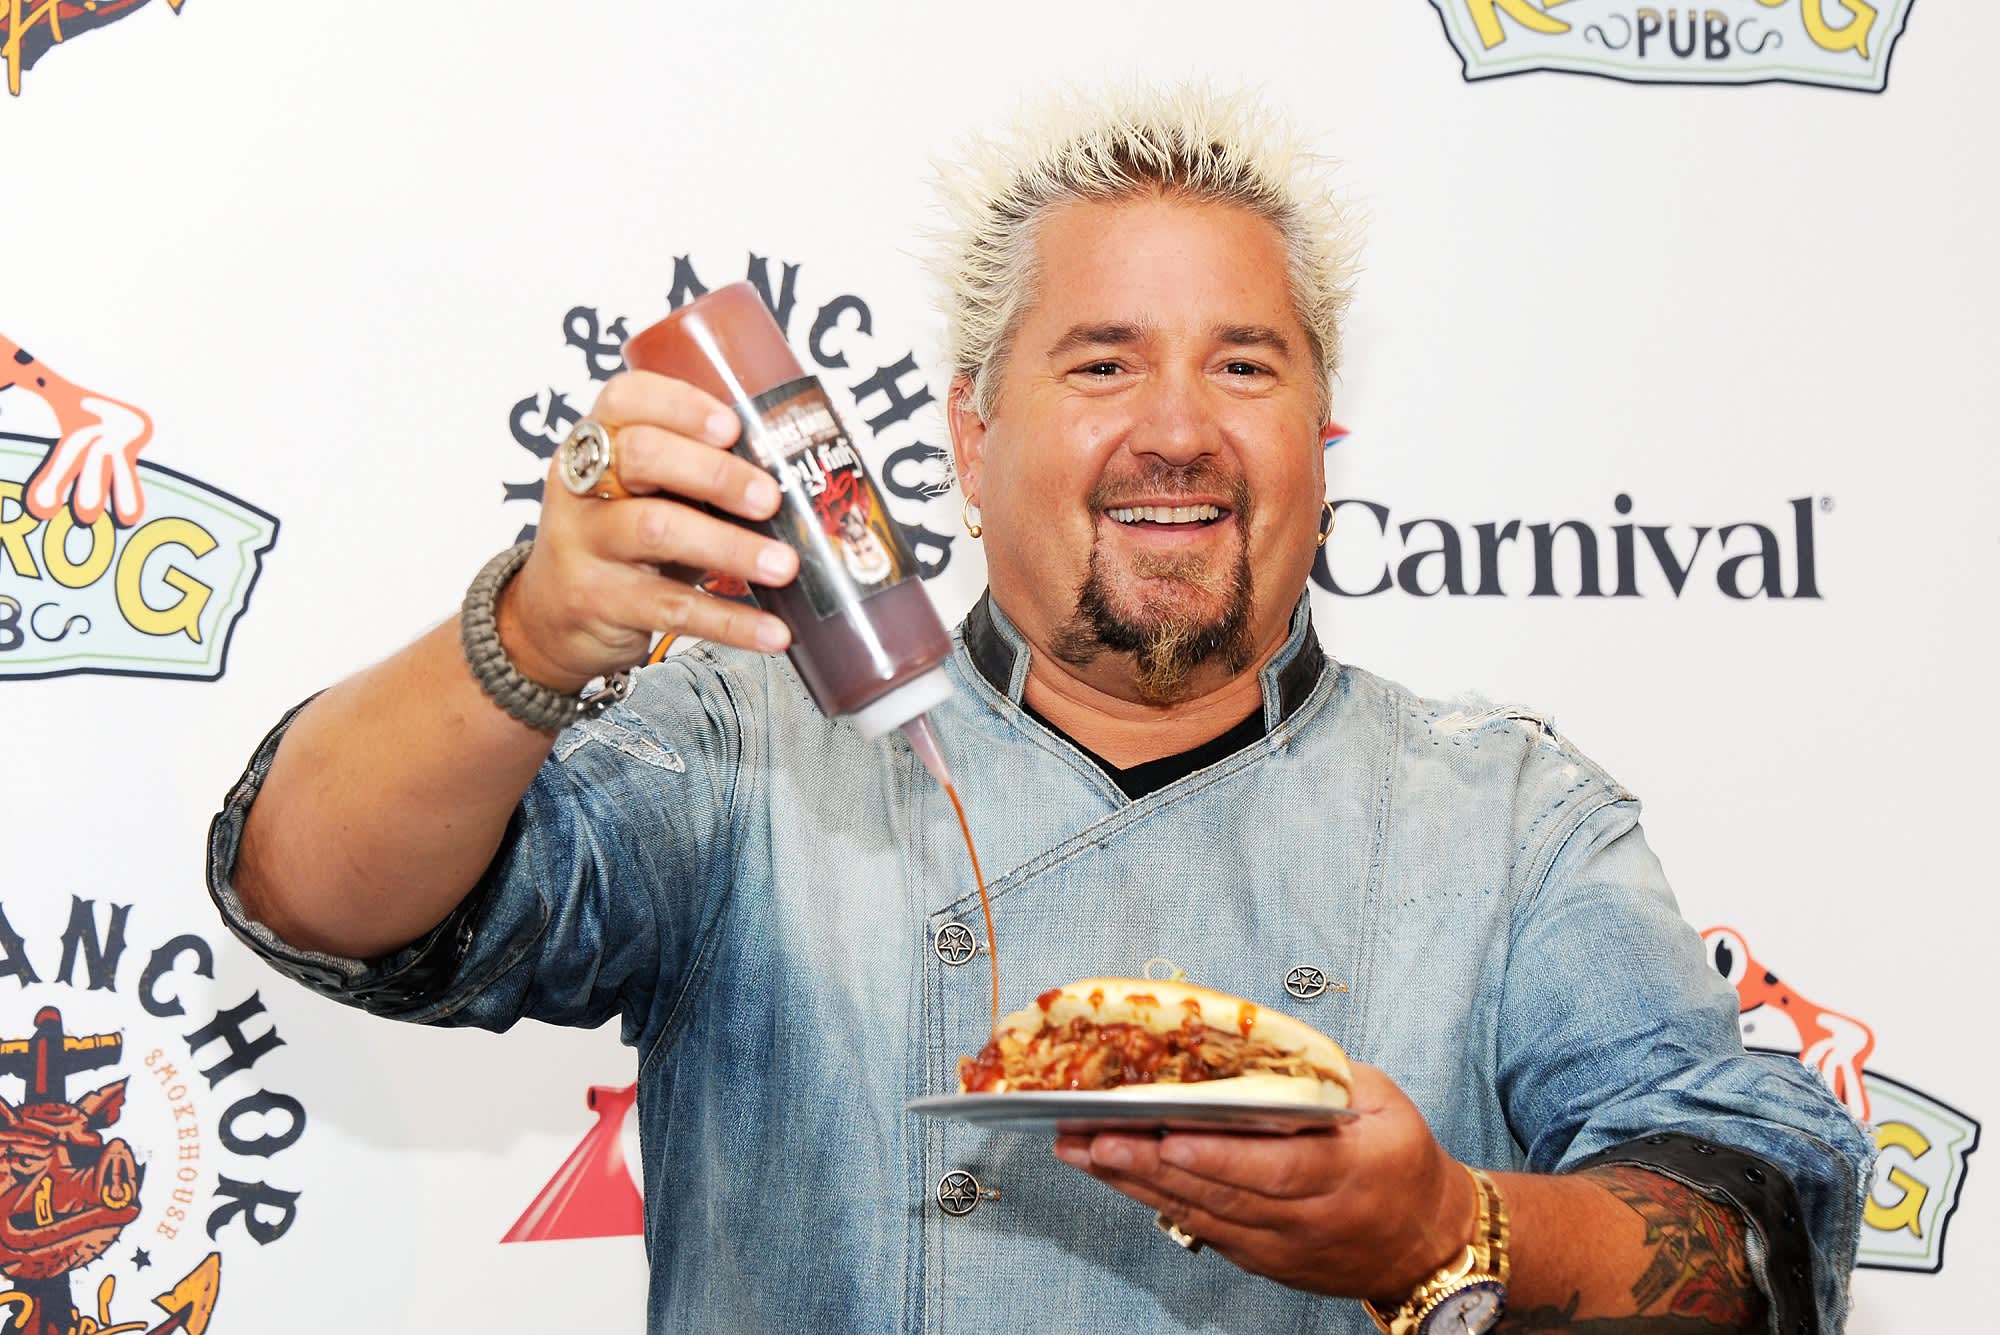 Celebrity chef Guy Fieri: These 3 ingredients will give you the best meals for the least amount of money - CNBC